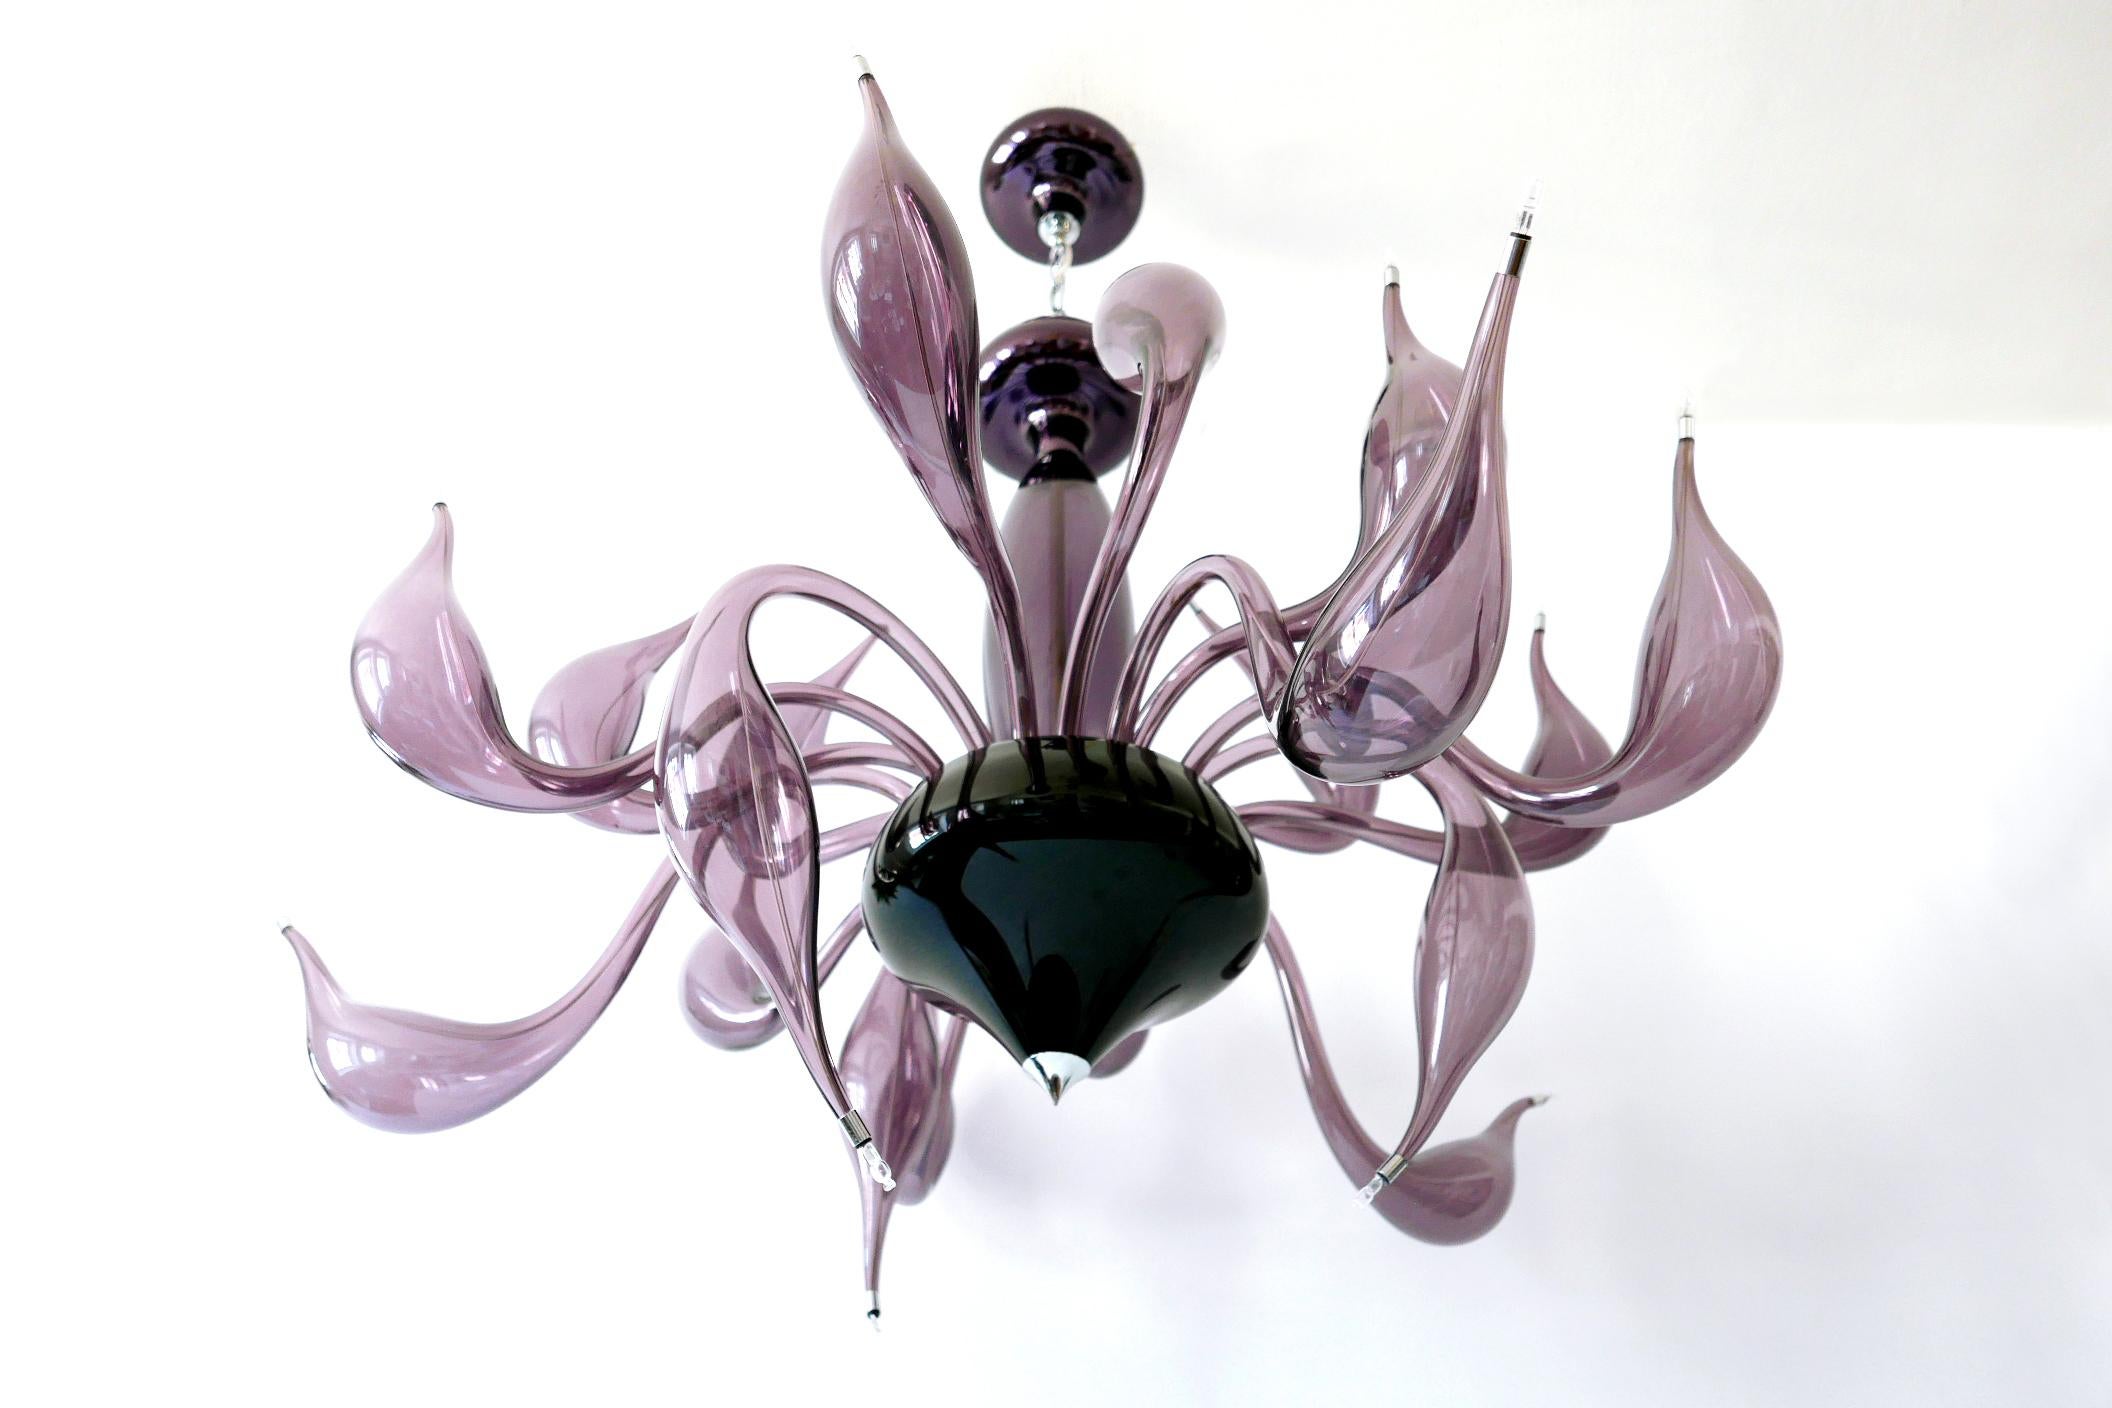 Sculptural Lu Murano Chandelier 18 Lights by Fabio Fornasier, 2004, Italy For Sale 4